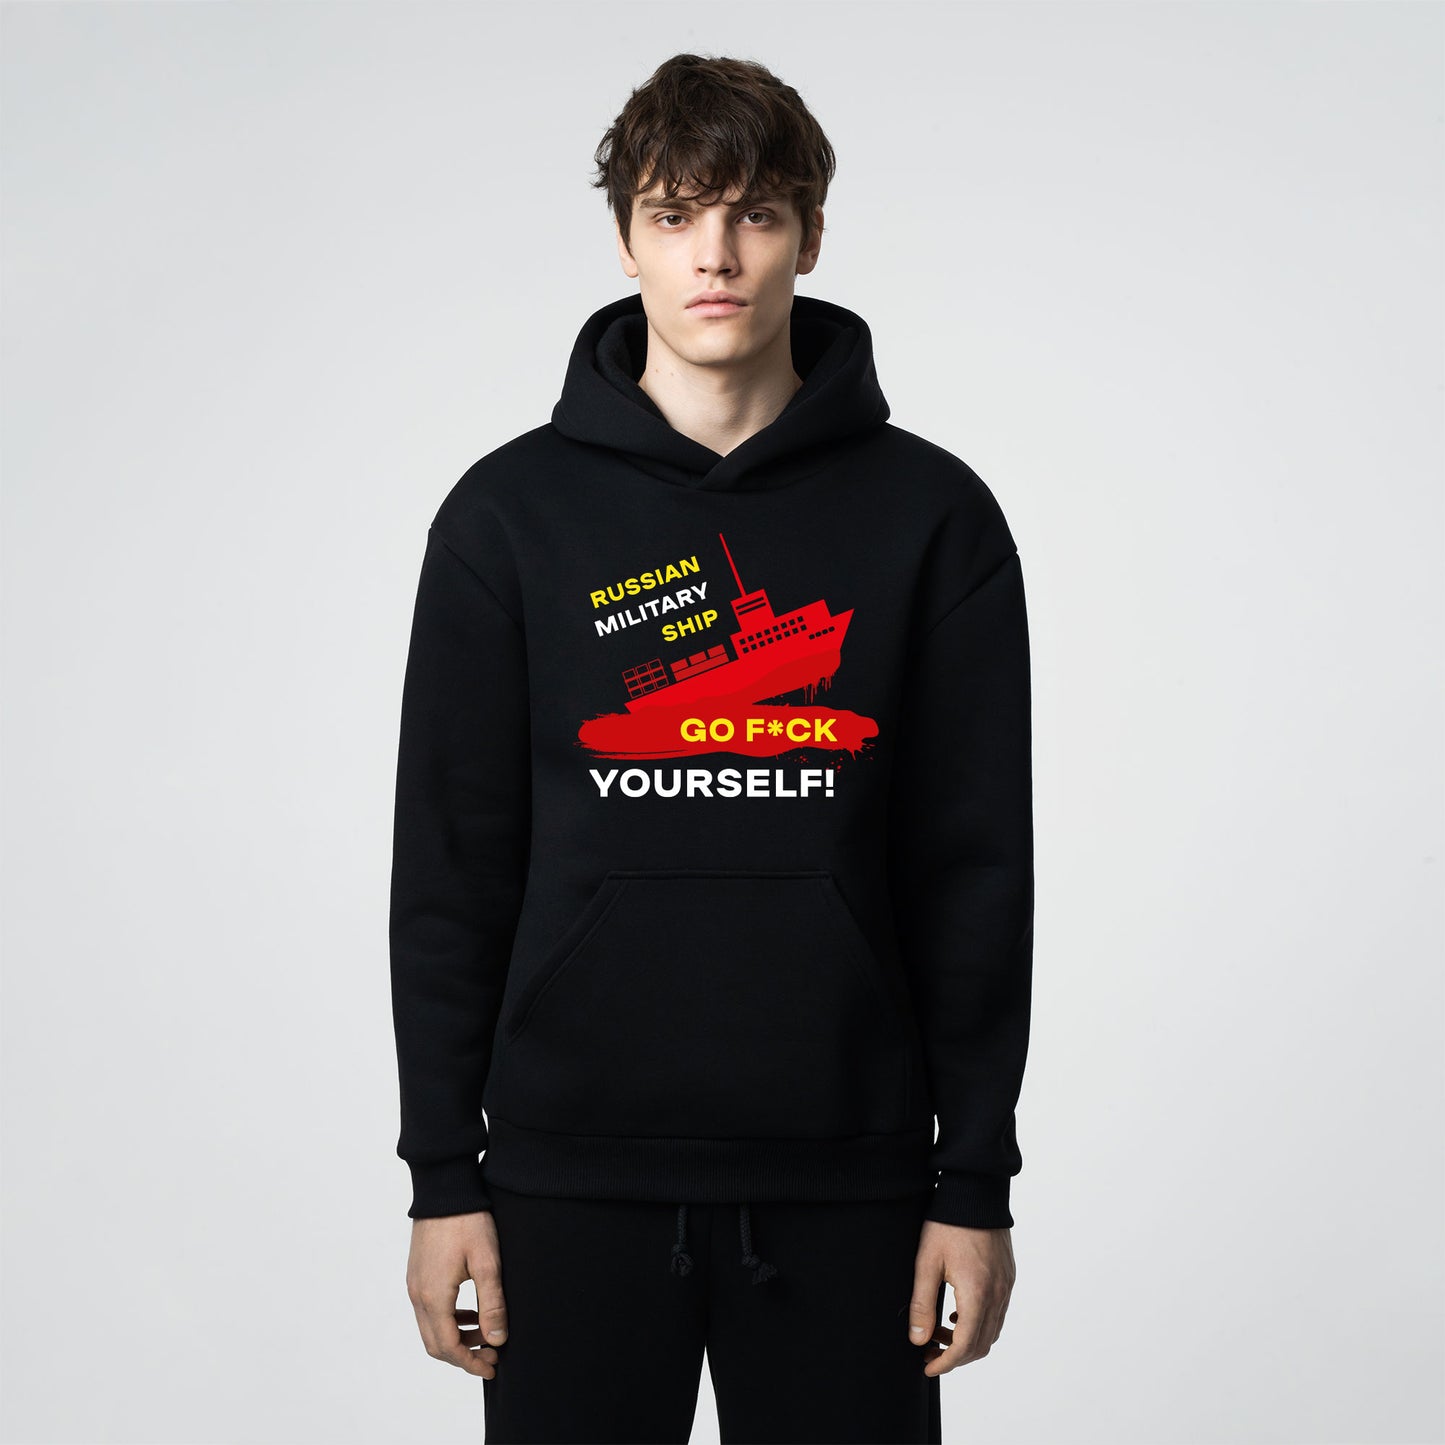 Casual hoodie russian military ship, go f*ck yourself